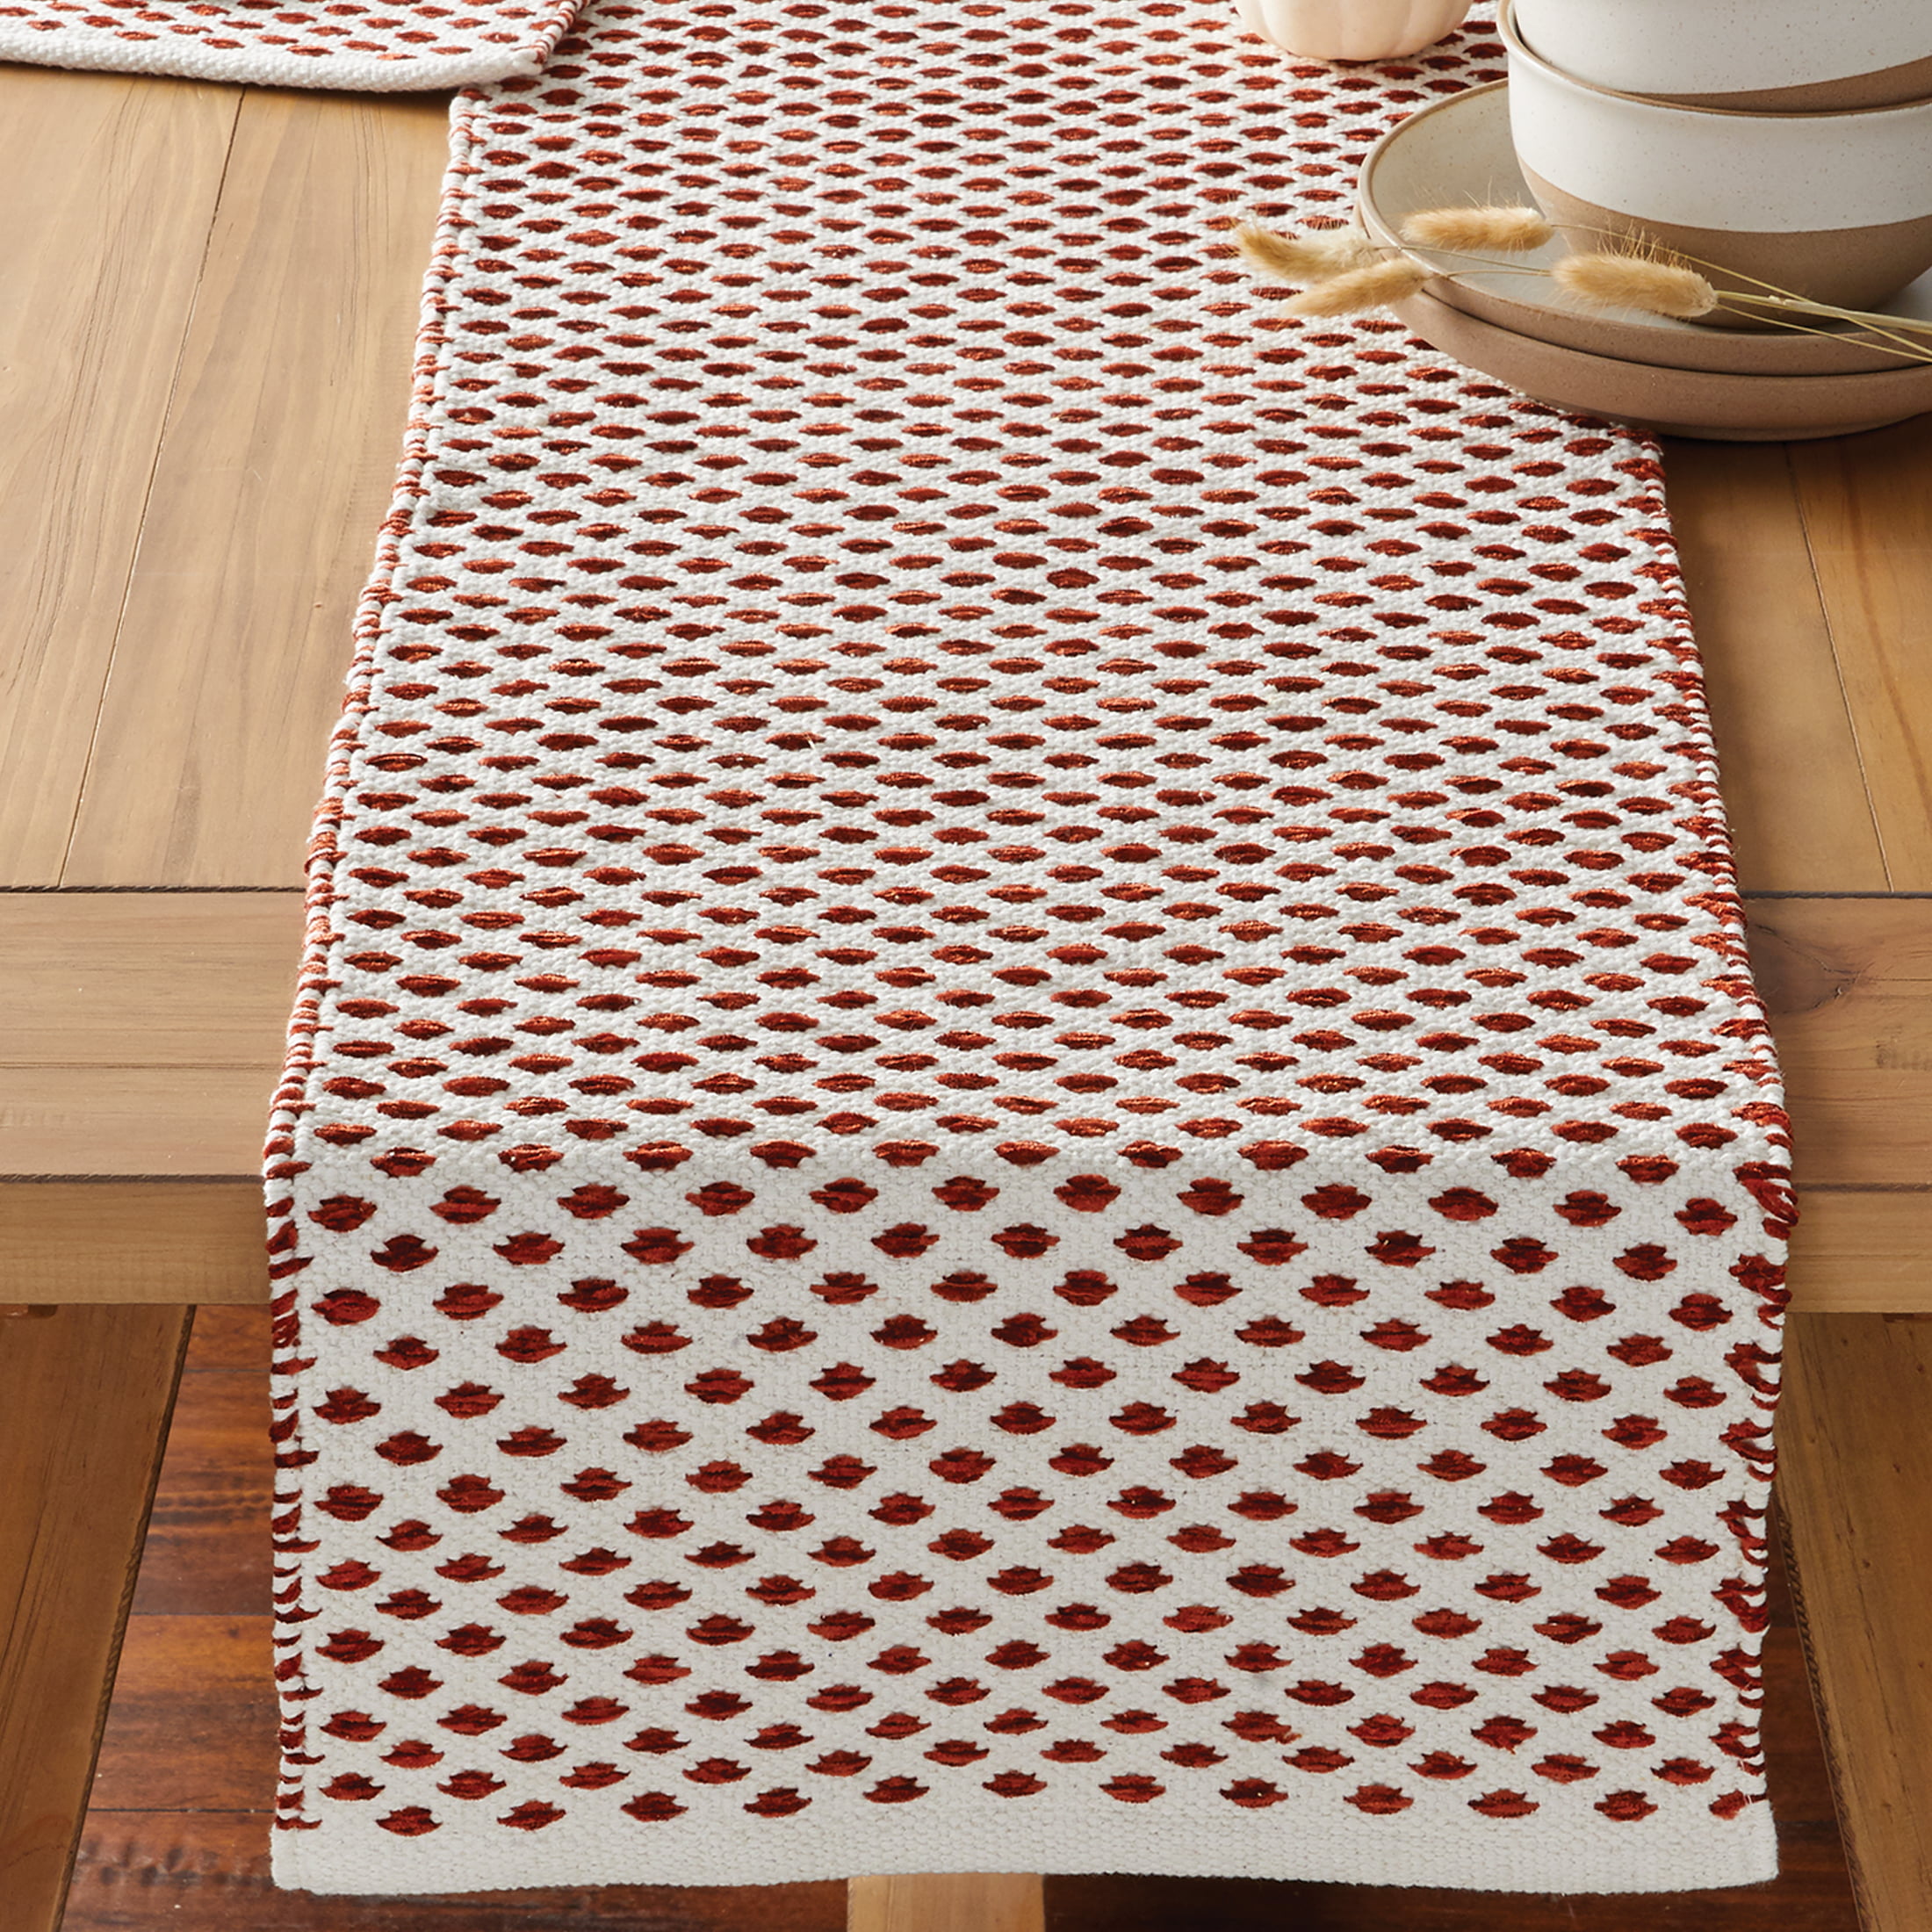 Holidays Ruvanti Table Runner .100% Cotton 14x72 Salsa Red/Fall & Christmas Table Runners Linen Table Runner Extra Long Table Runner for Coffee Gatherings and Thanksgiving Dinner Parties. 